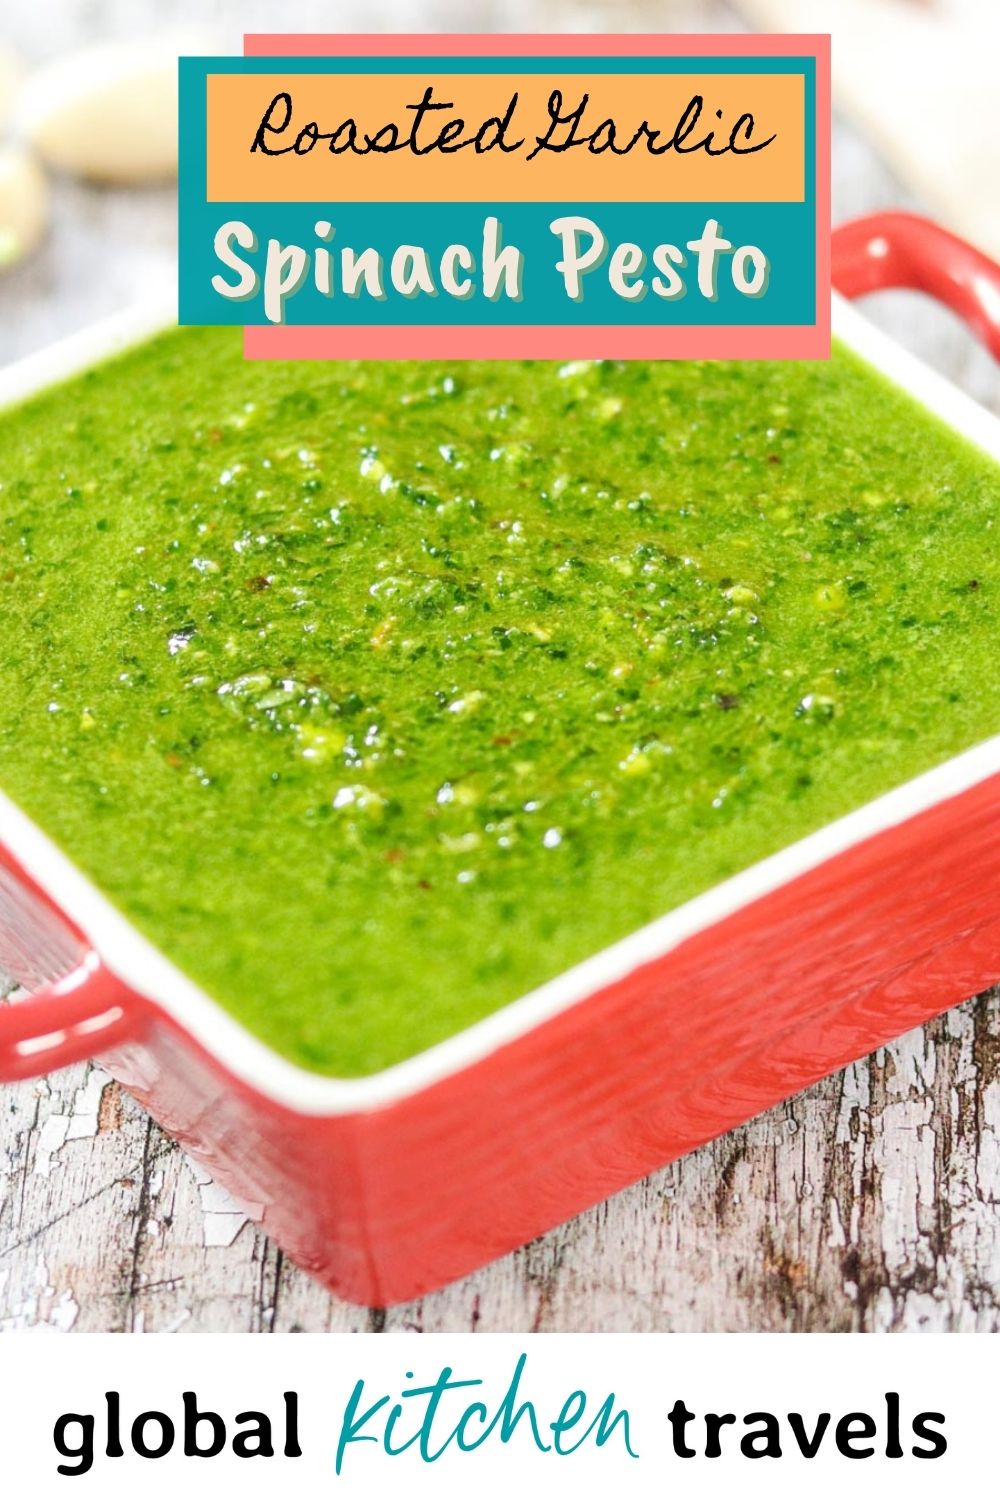 Spinach Pesto with text